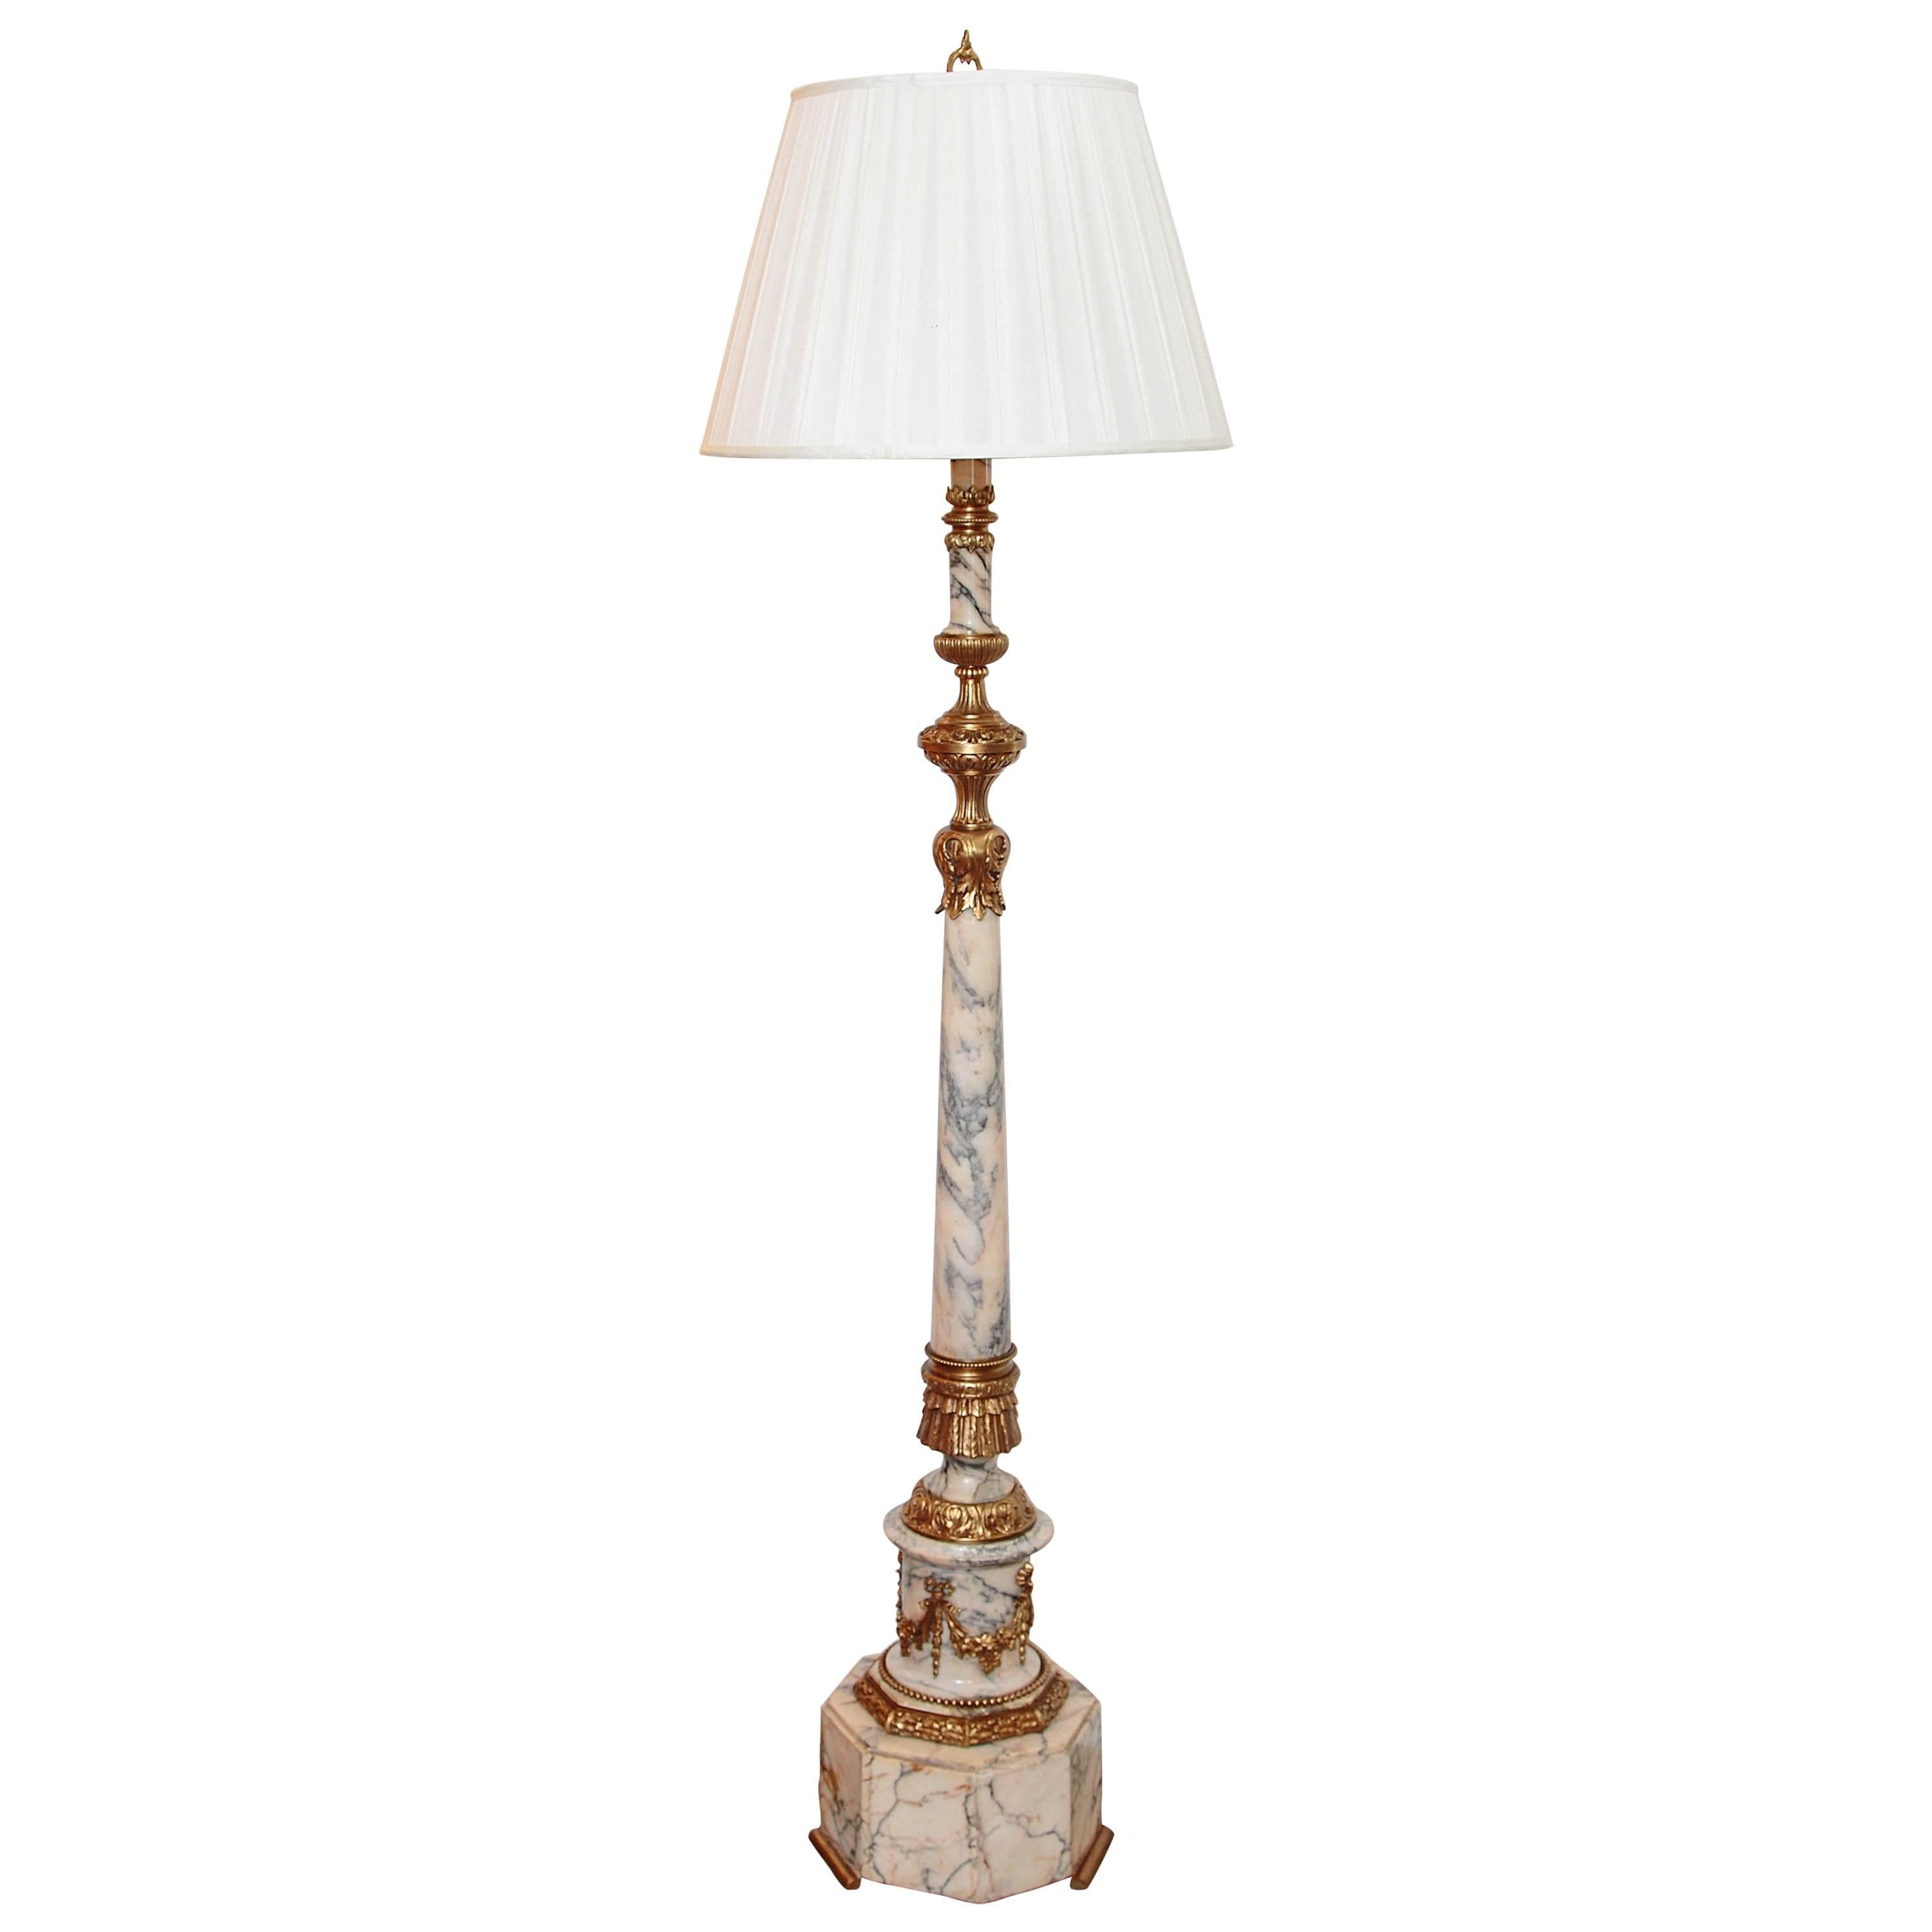 Late 19th Century French Louis XVI Marble and Gilt Bronze Column Floor Lamp